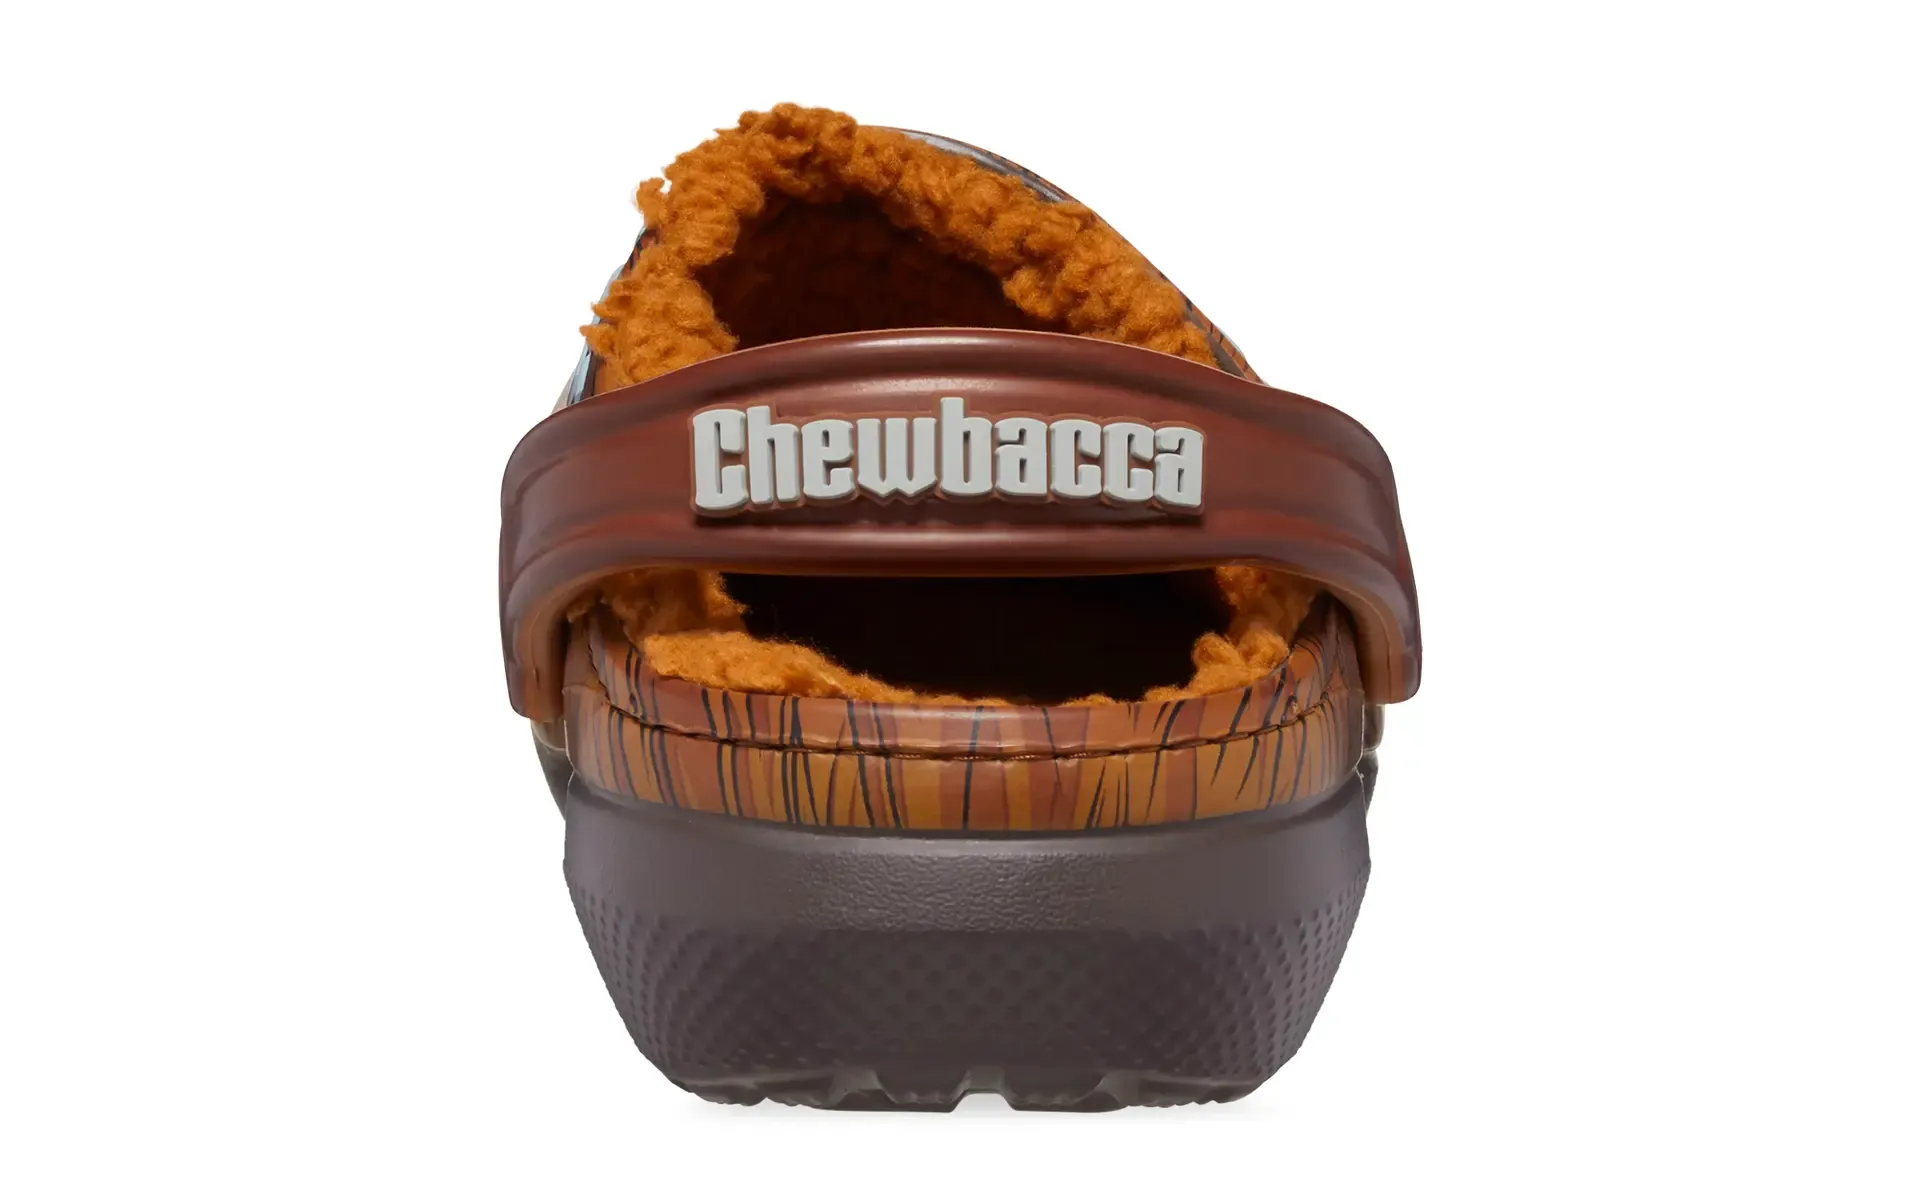 sitesupply.co Star Wars Crocs Classic Clog Chewbacca 208858-206 Release Info